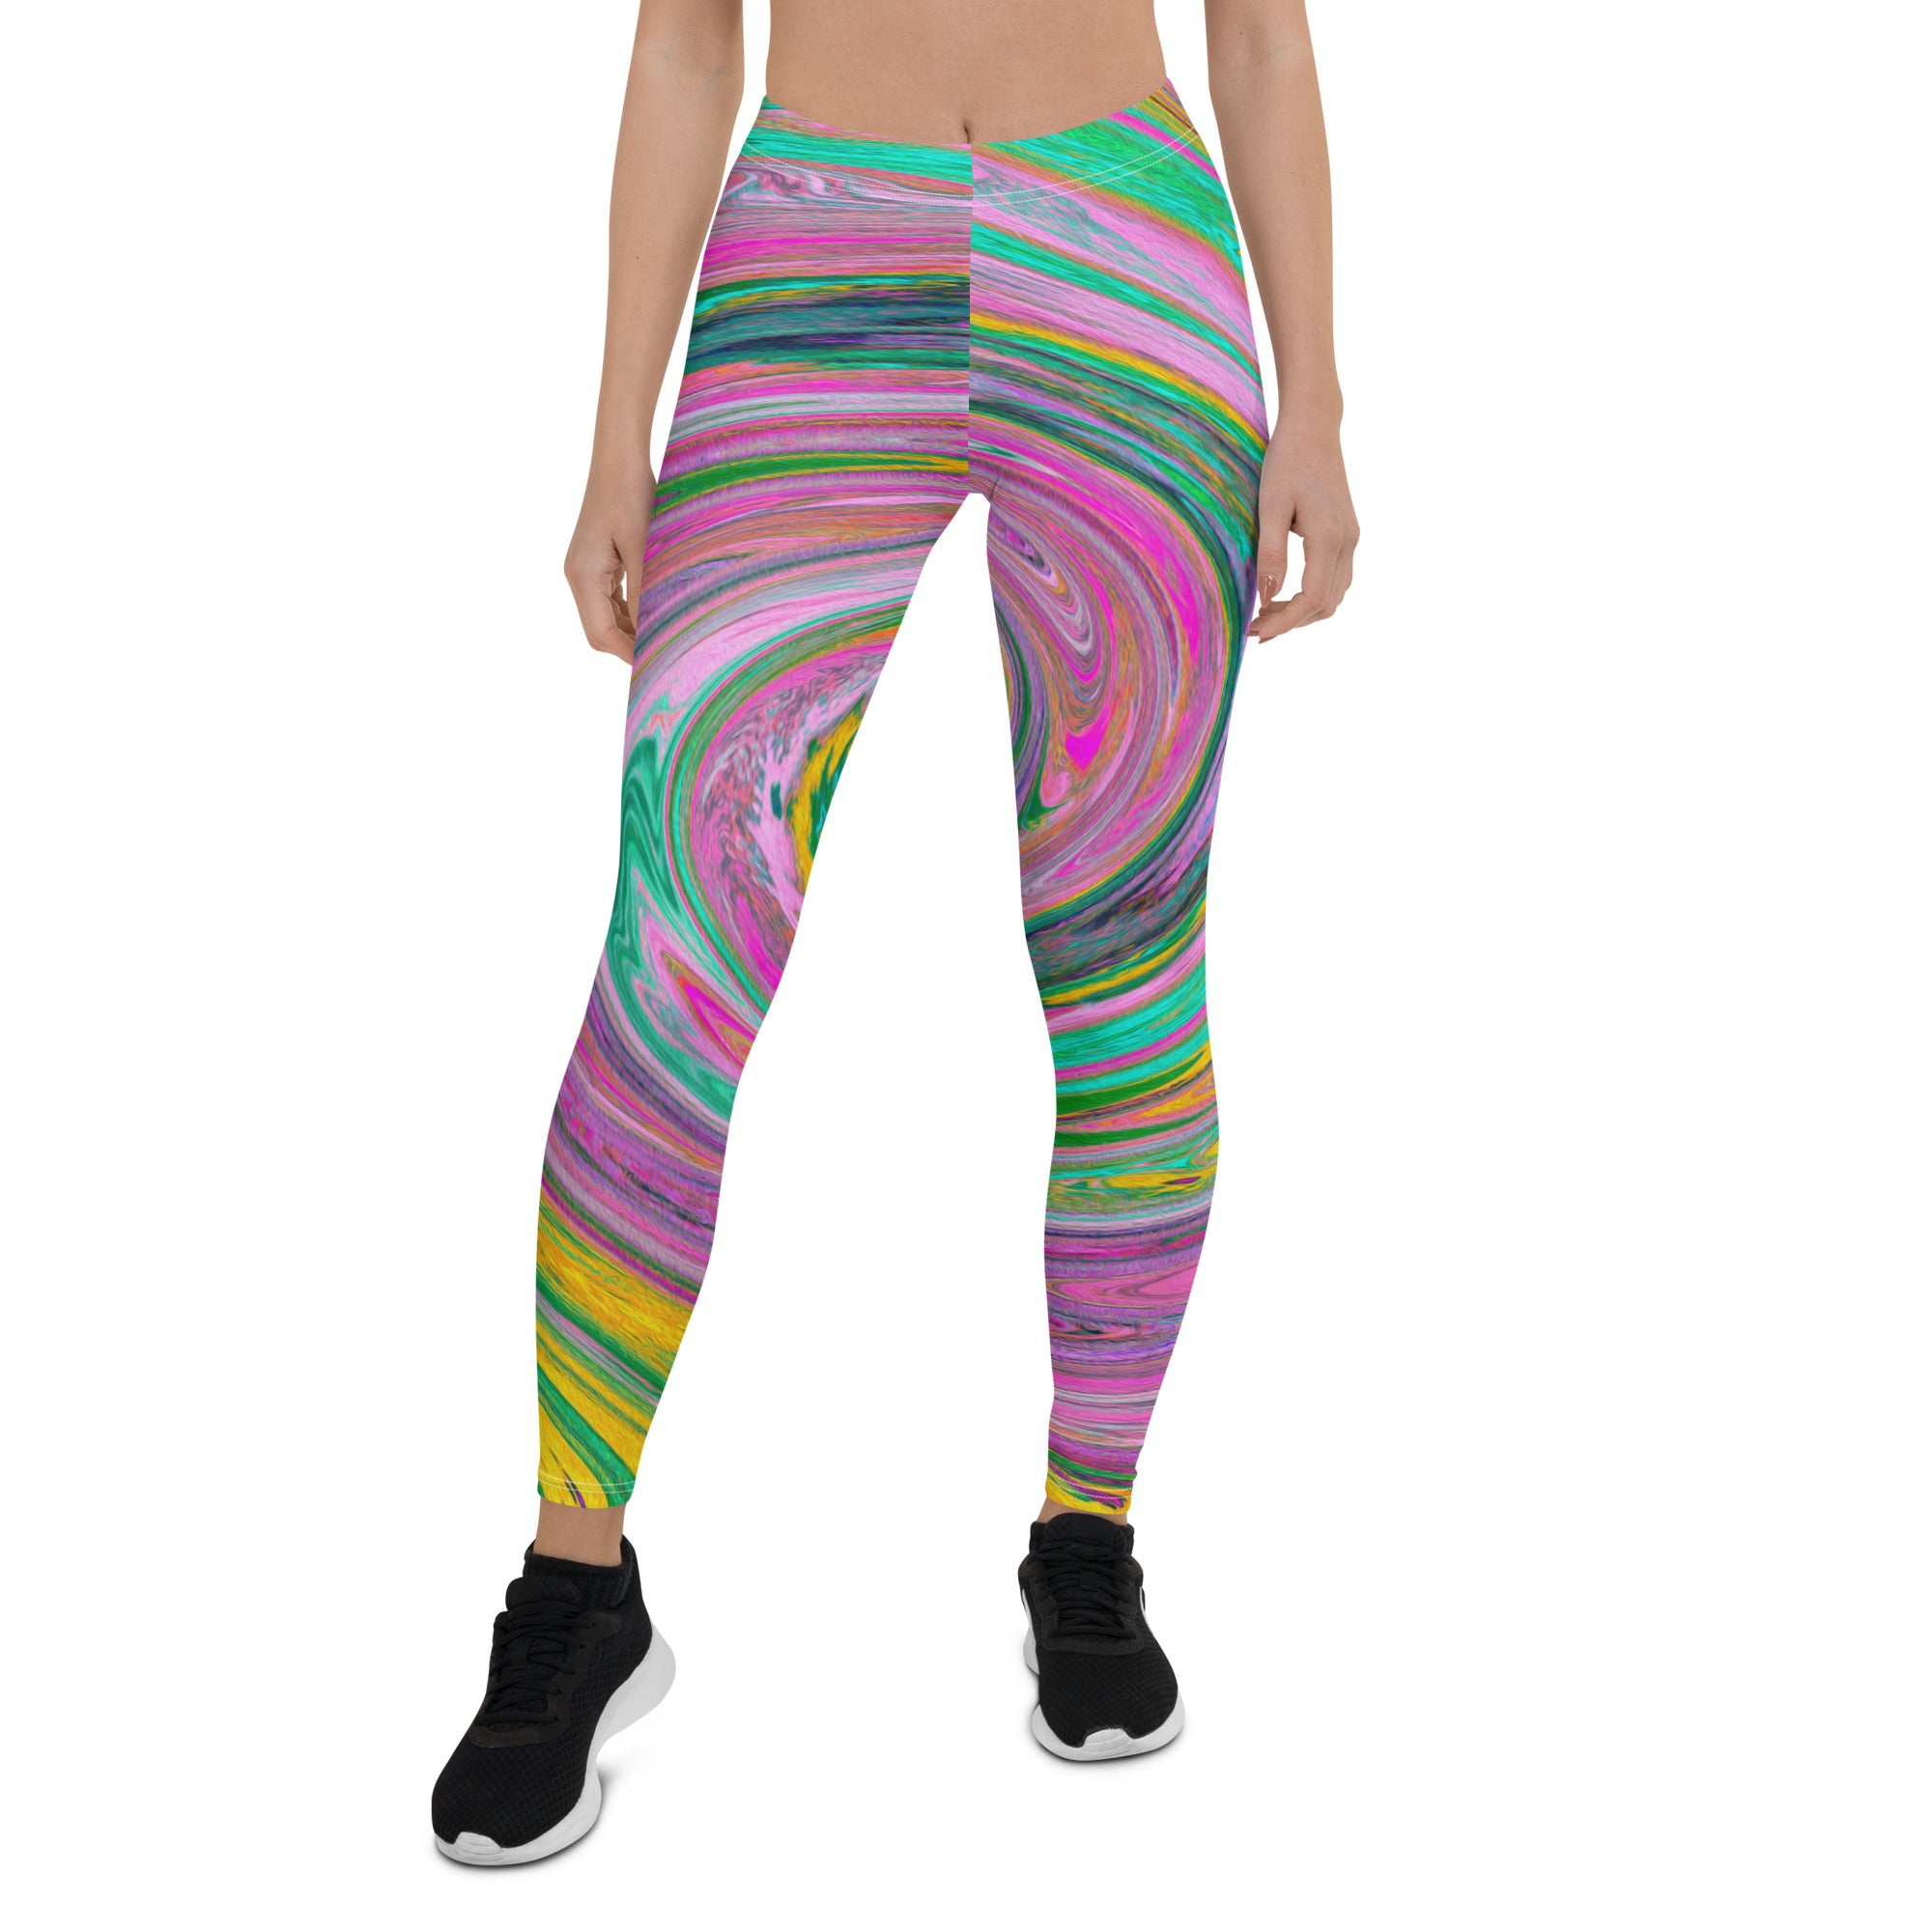 Leggings for Women - Groovy Abstract Retro Pink and Mint Green Swirl